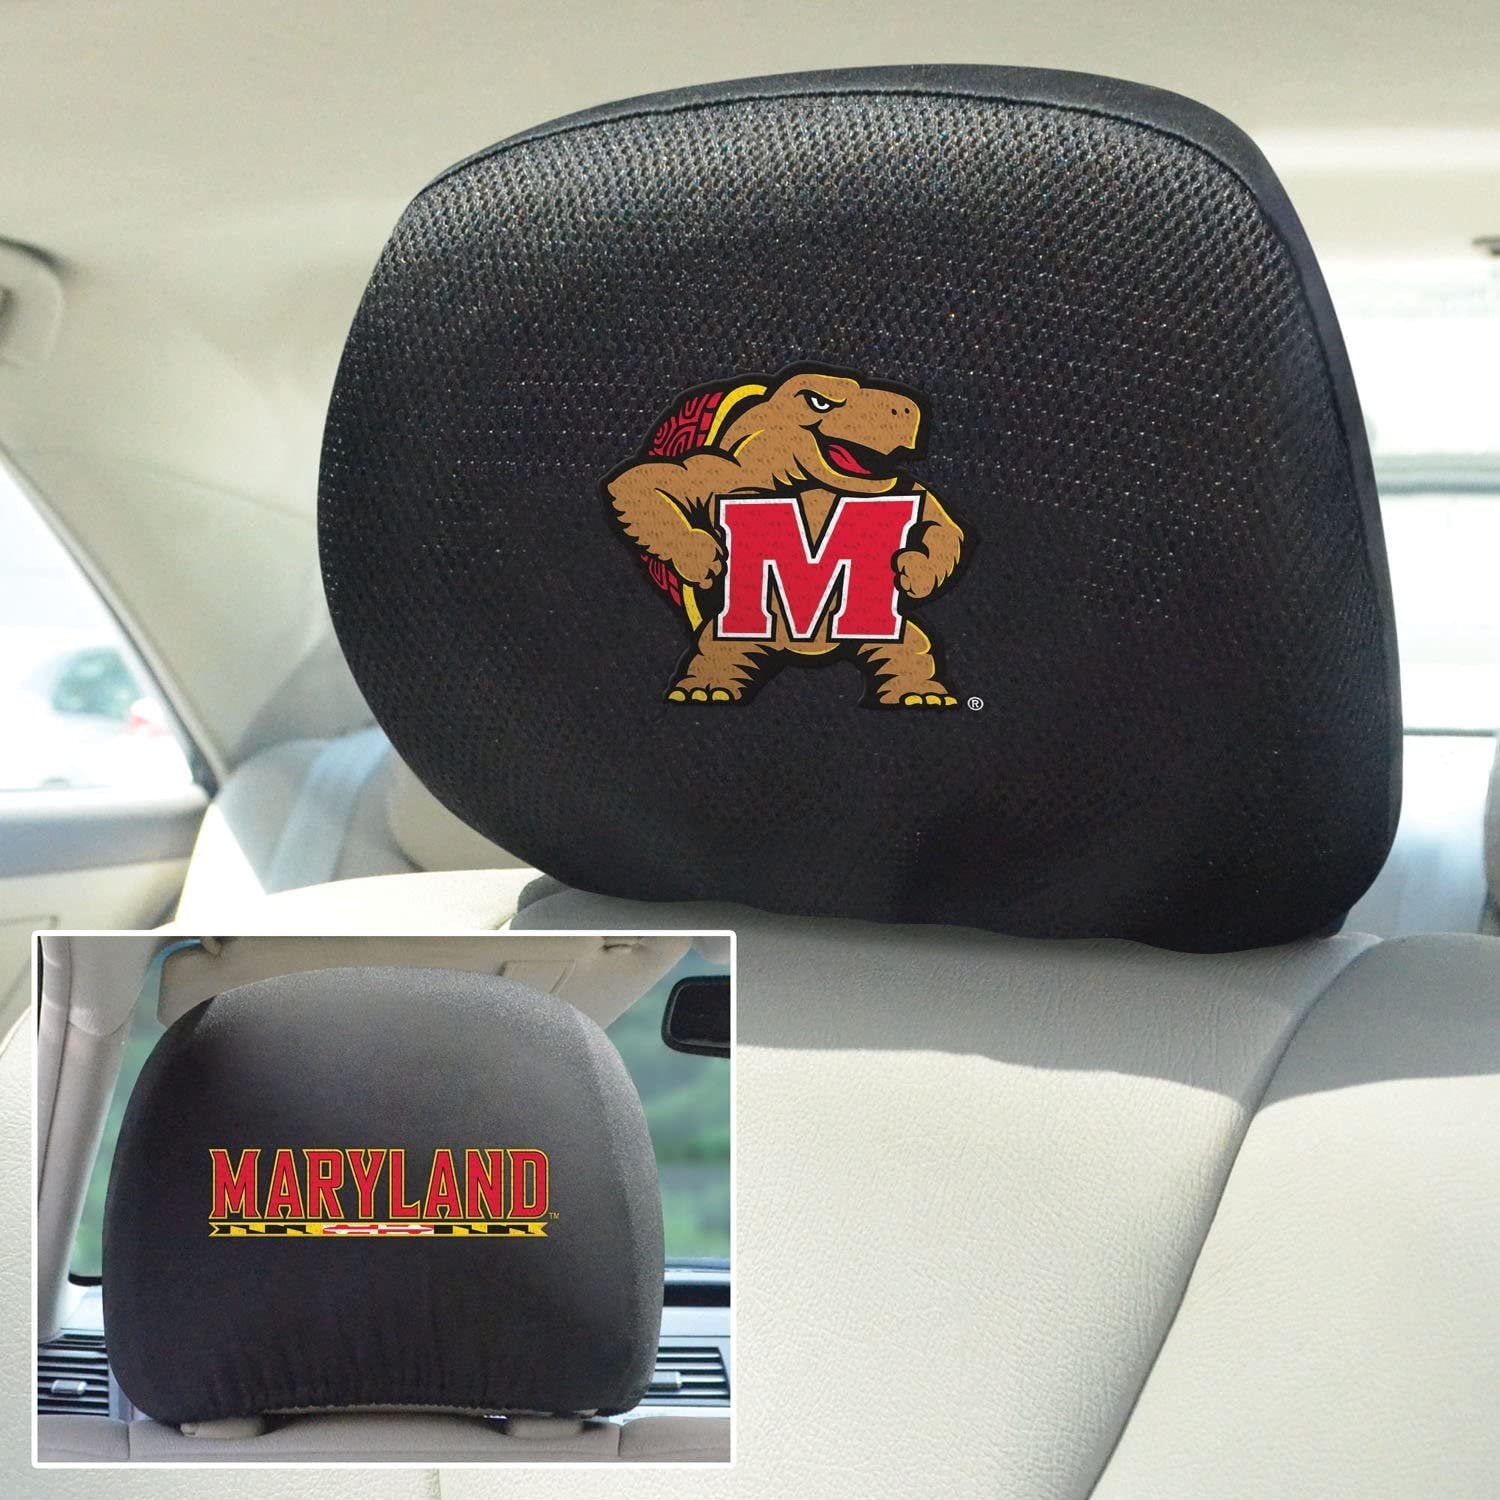 University of Maryland Terrapins Pair of Premium Auto Head Rest Covers, Embroidered, Black Elastic, 14x10 Inch